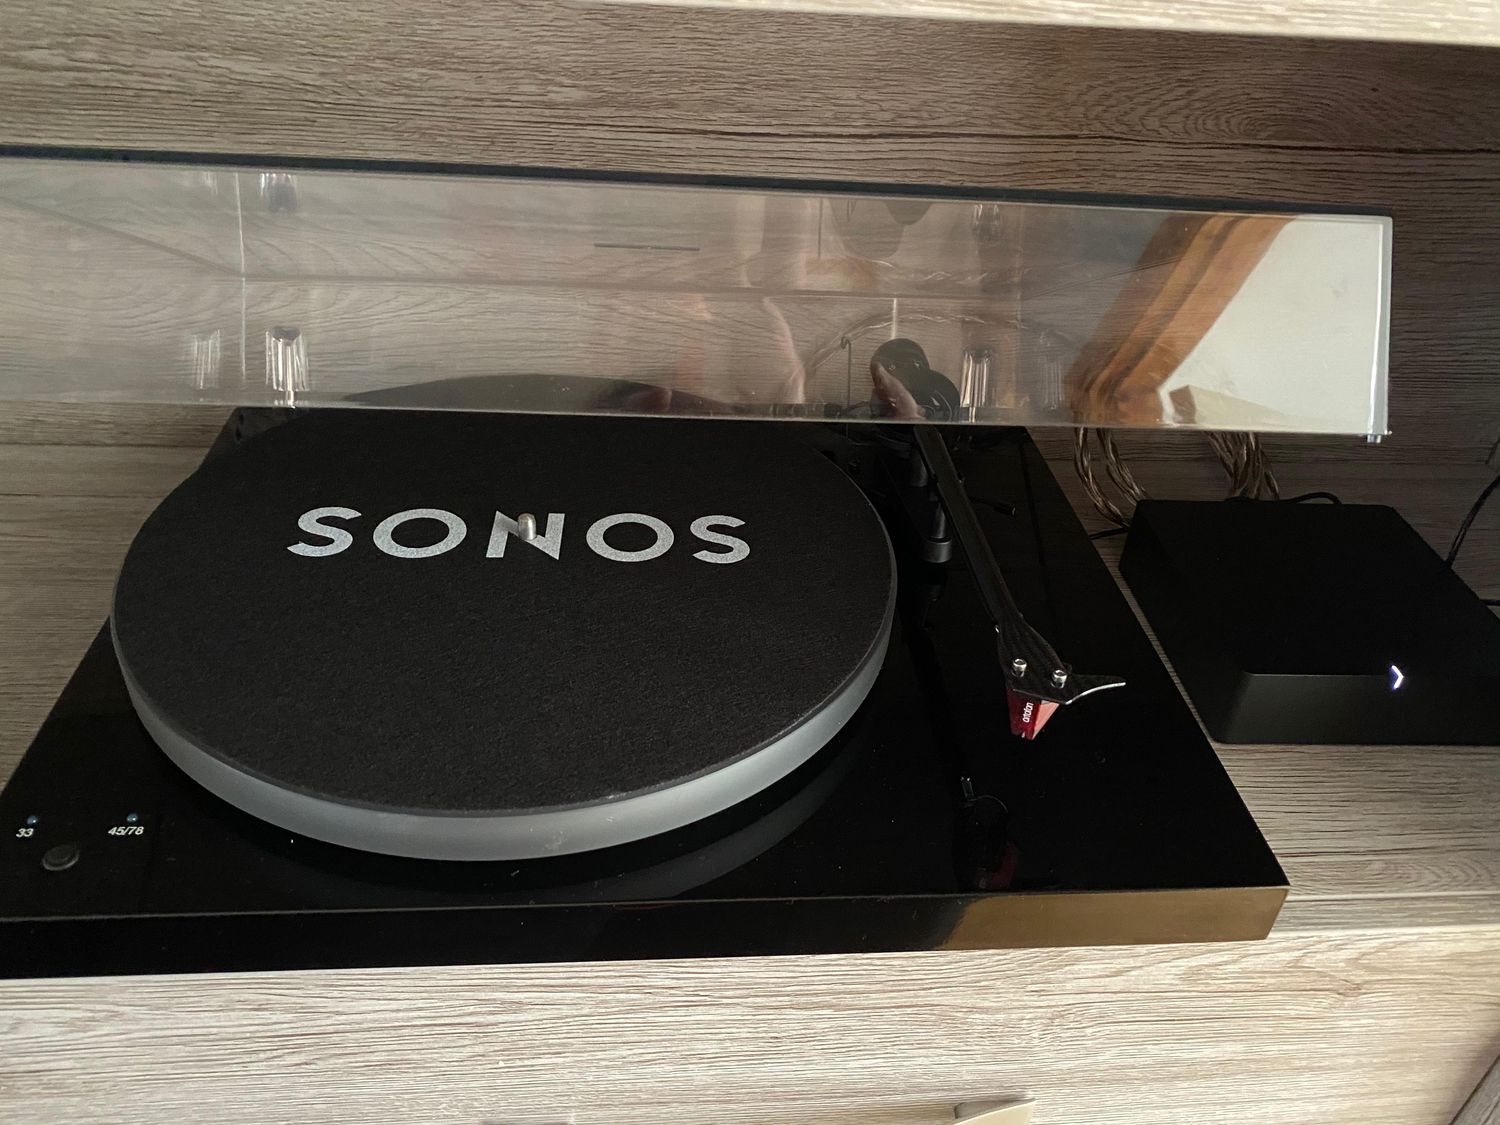 How To Connect Pro-Ject Turntable To Sonos